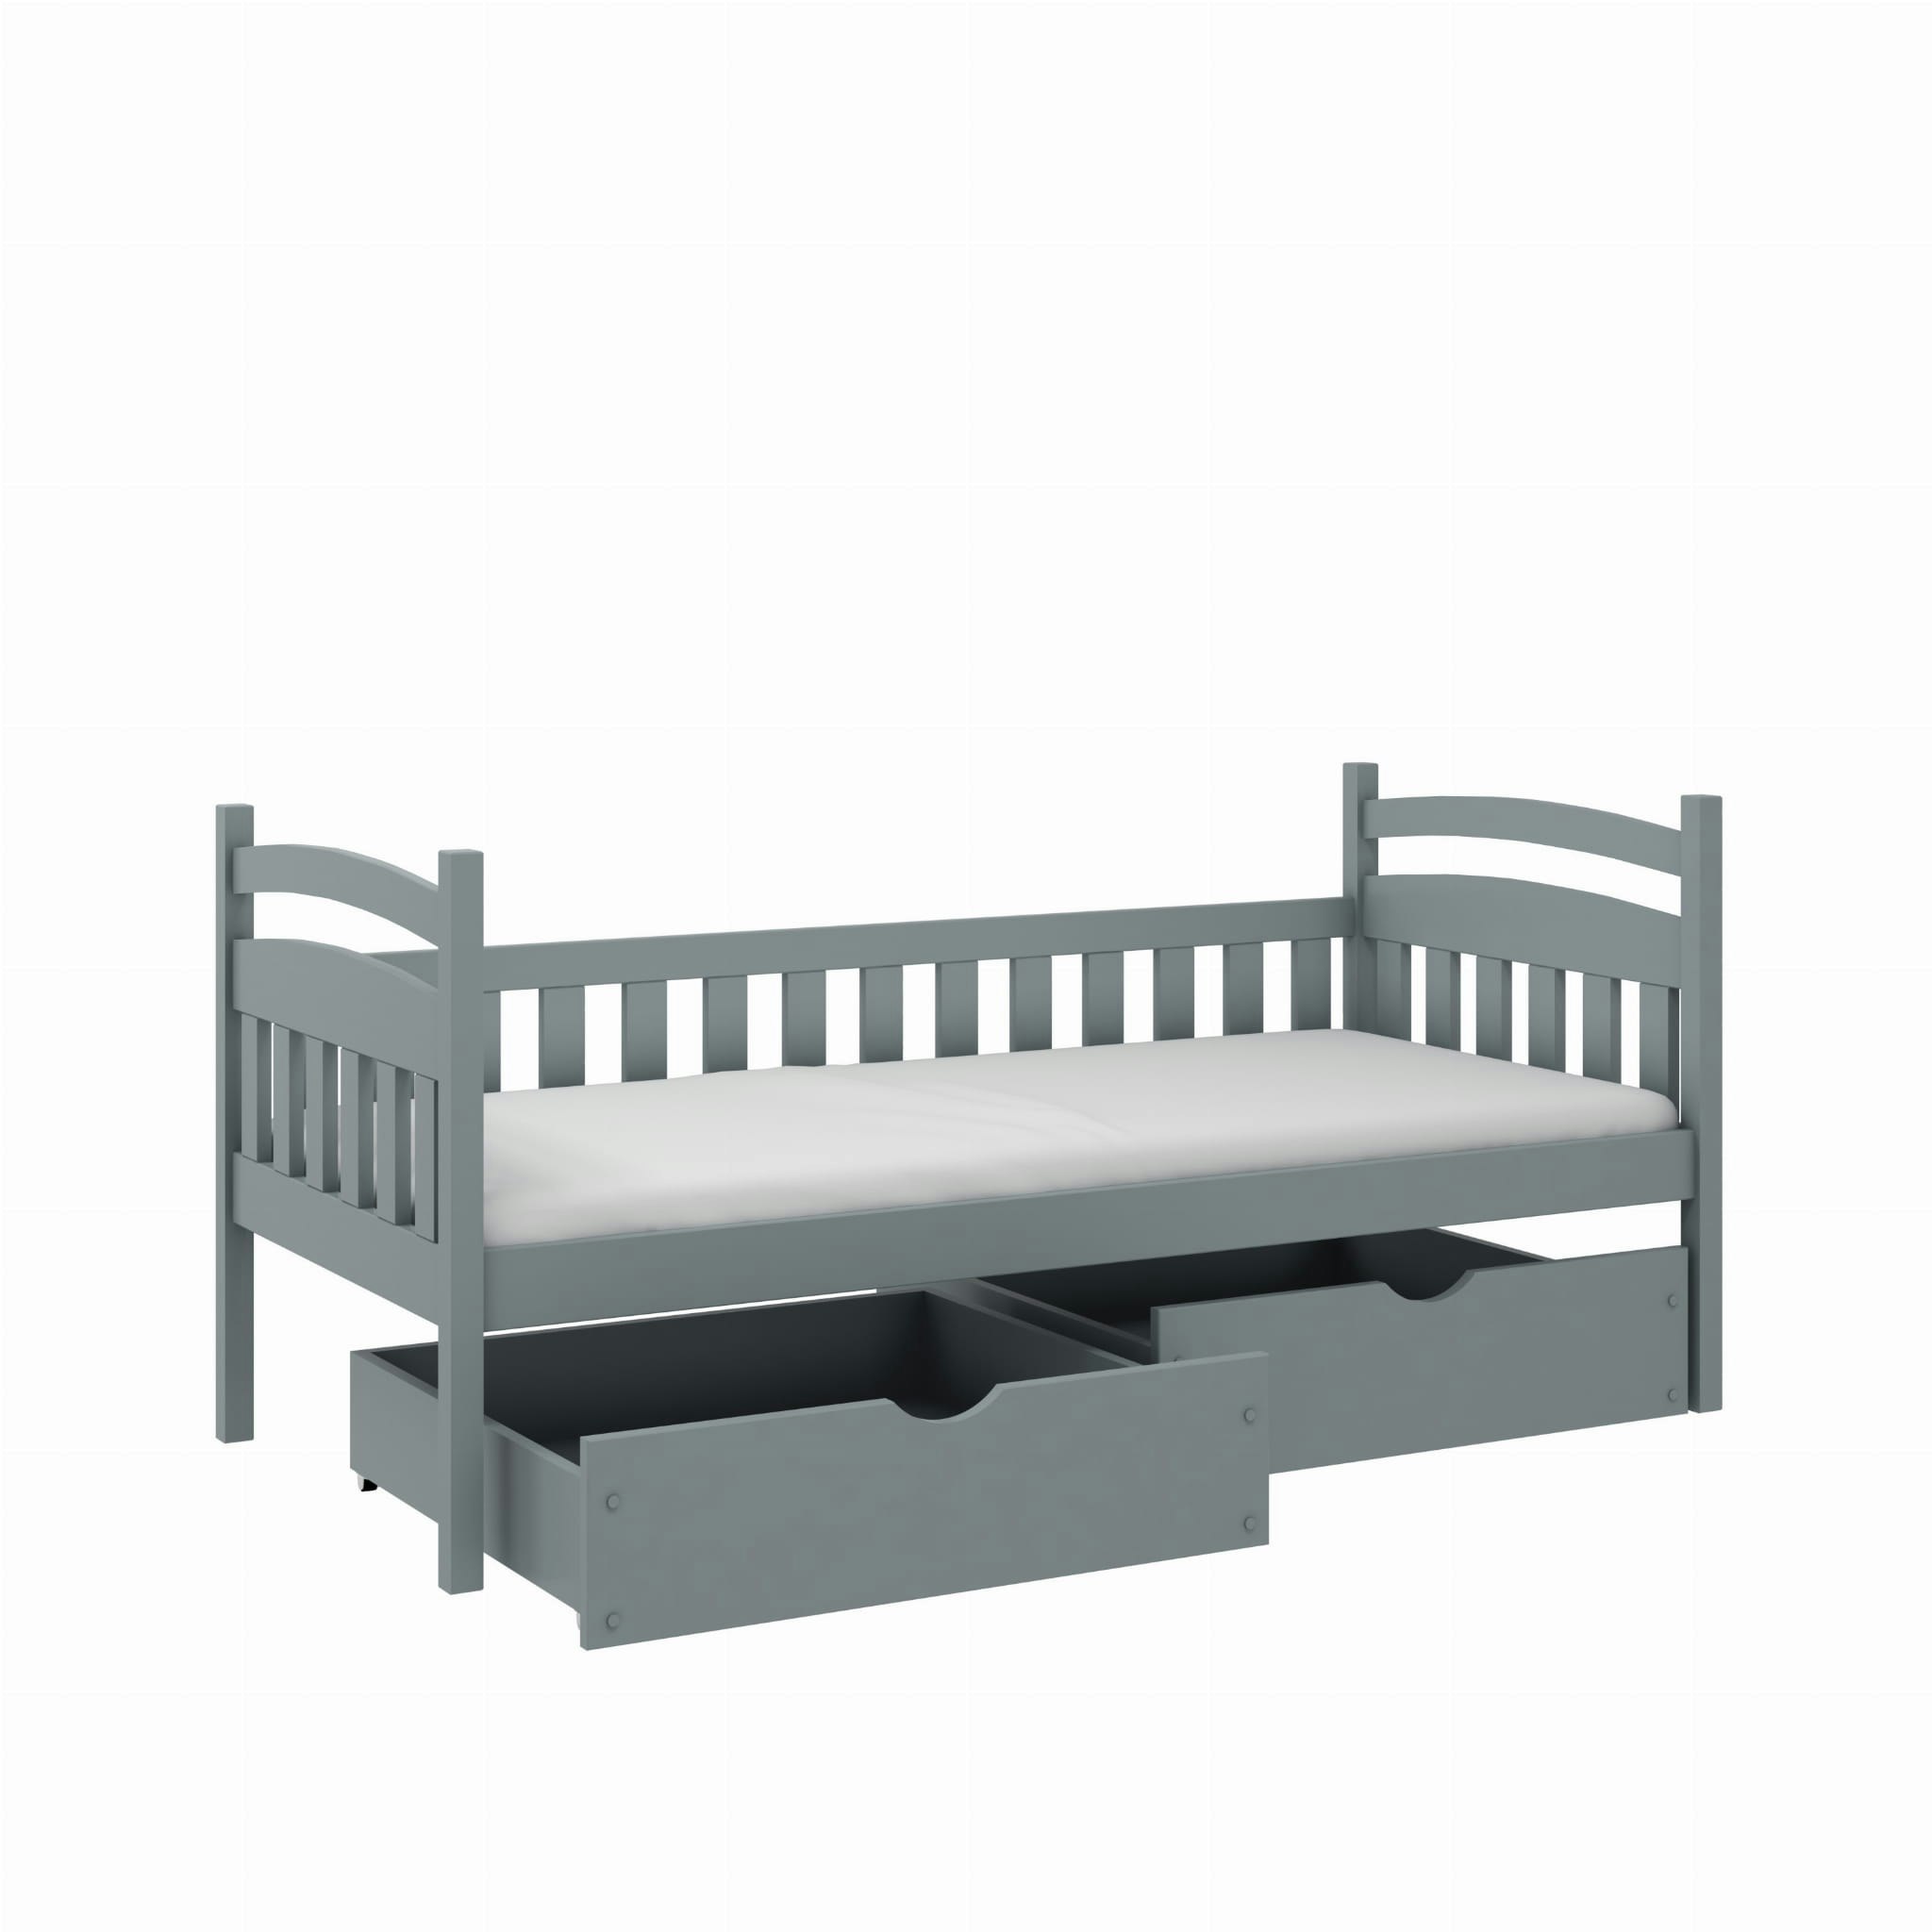 Children's bed with barrier, daybed Thiago Children's bed with barrier, daybed Thiago